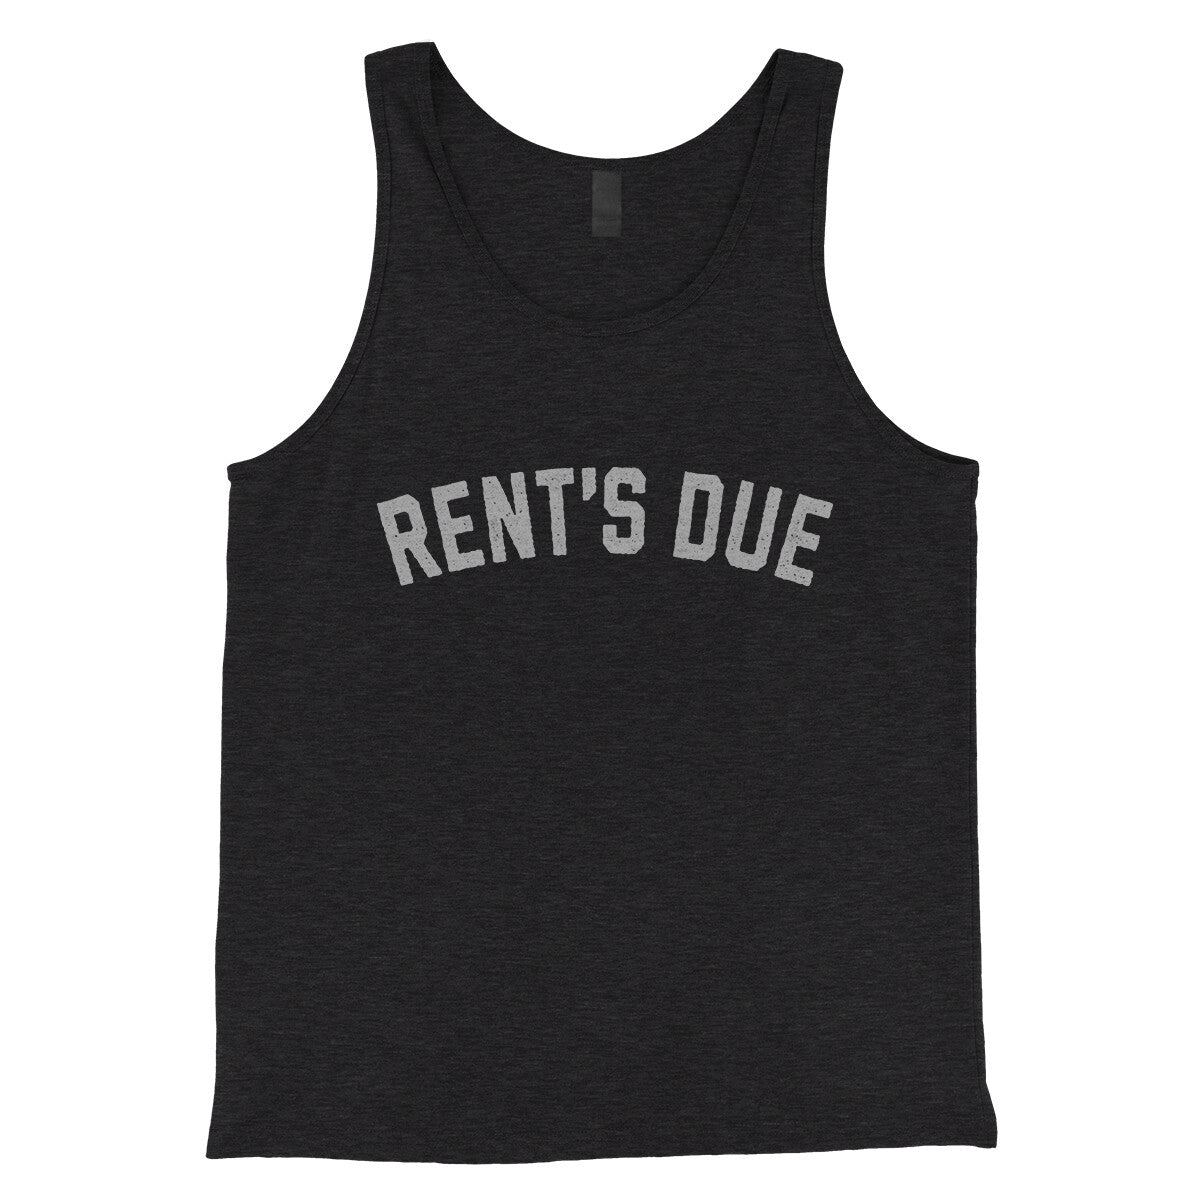 Rent's Due in Charcoal Black TriBlend Color